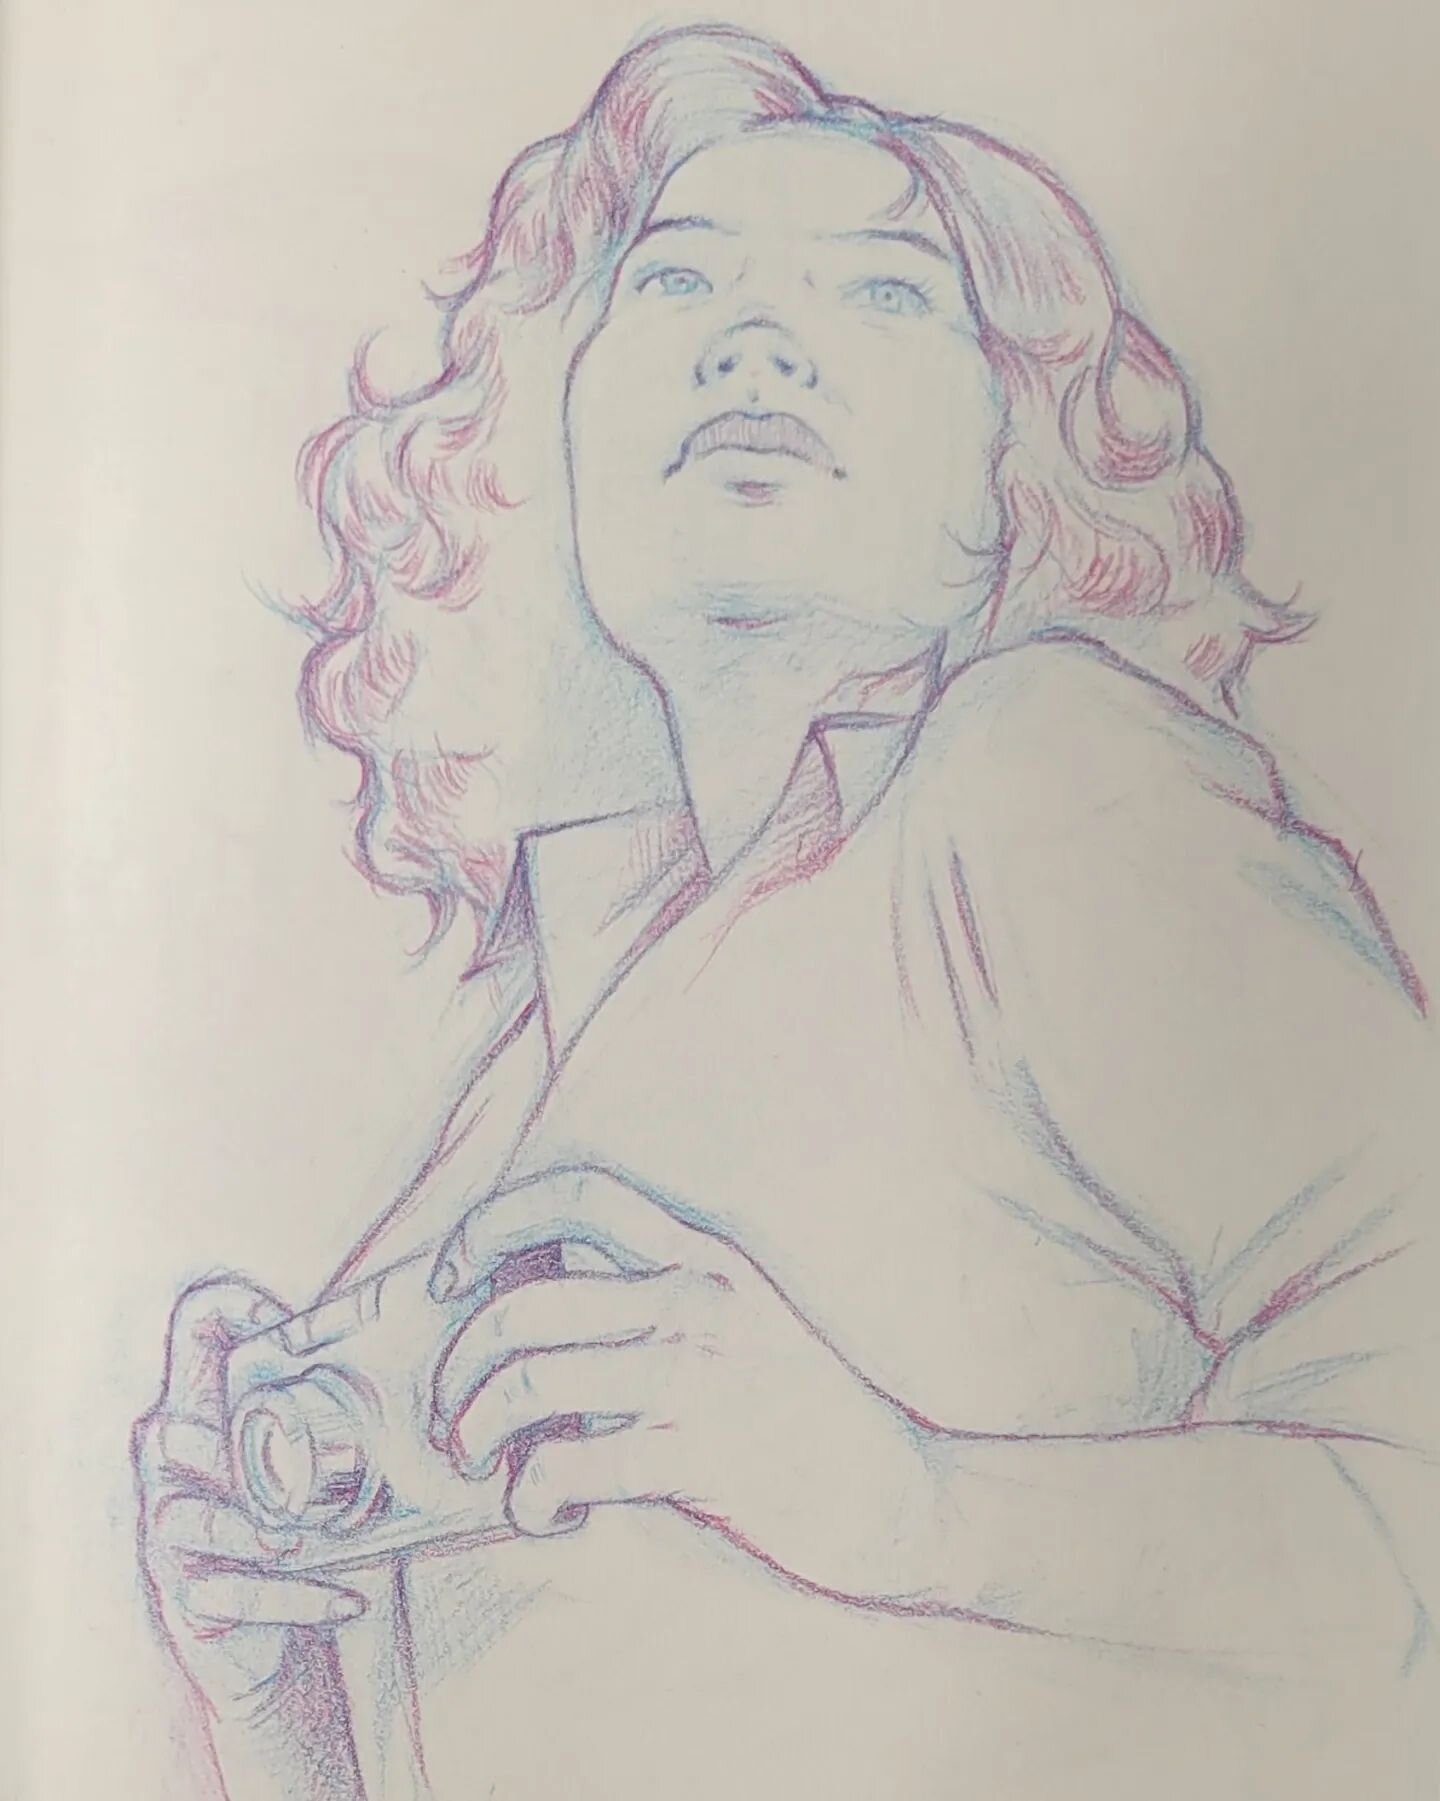 I tried to draw my amazing wife from memory. A quick sketch of when she's on the hunt for a good shot on film. ❤️😎 📸 @mkrshoots

#streetphotography #photographer #newyorkcityphotography #artist #illustration #illustrationartists #illustratorsoninst